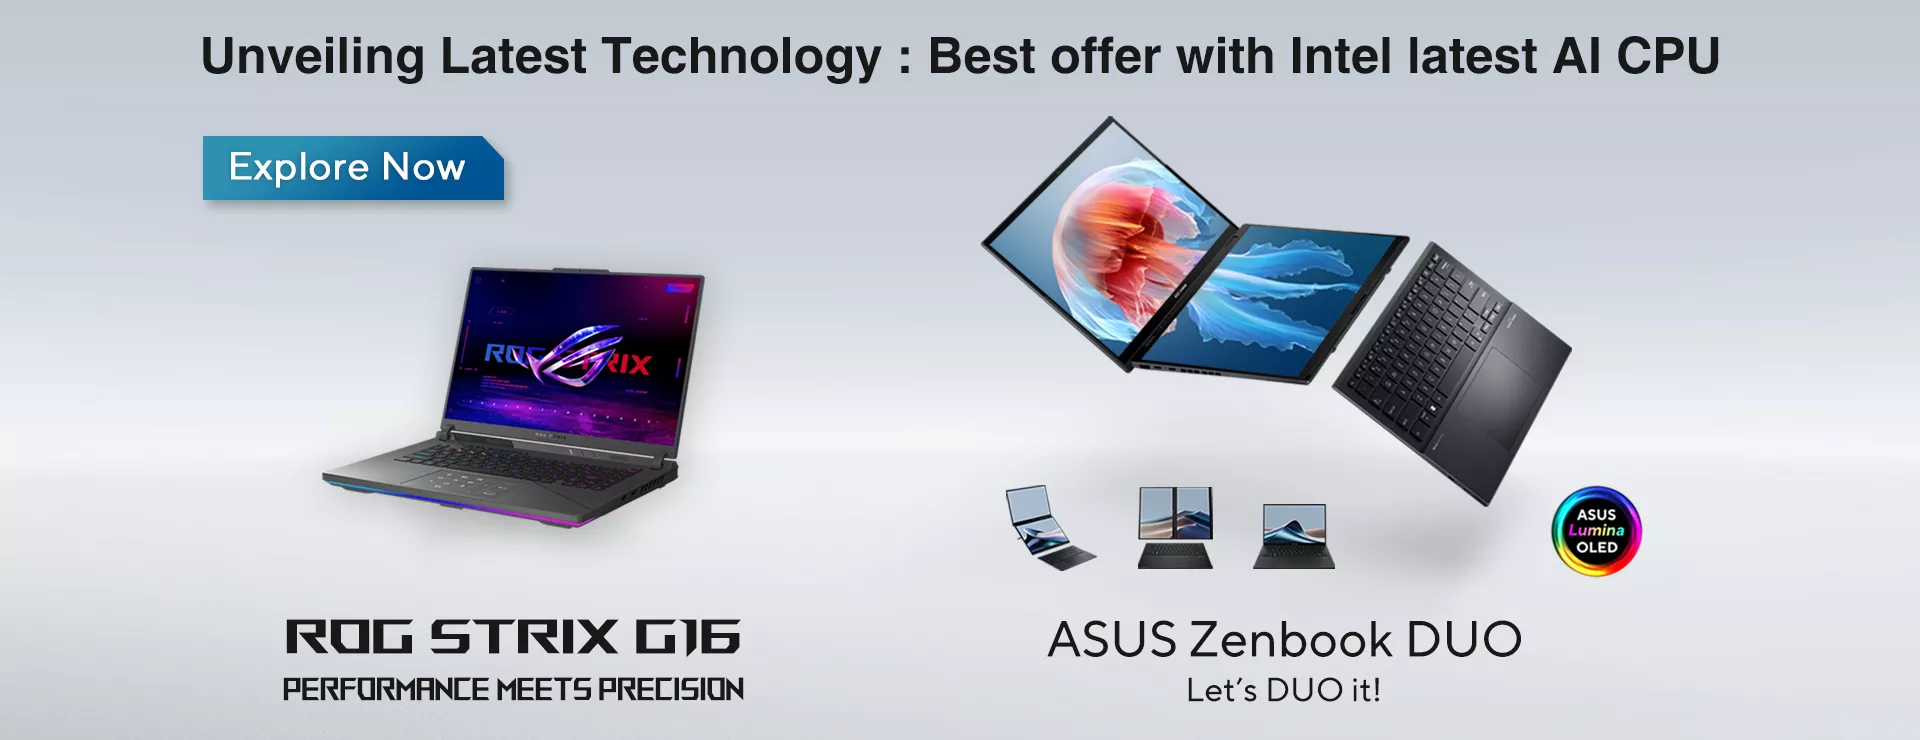 Unveiling latest technology: best offer with Intel latest AI CPU